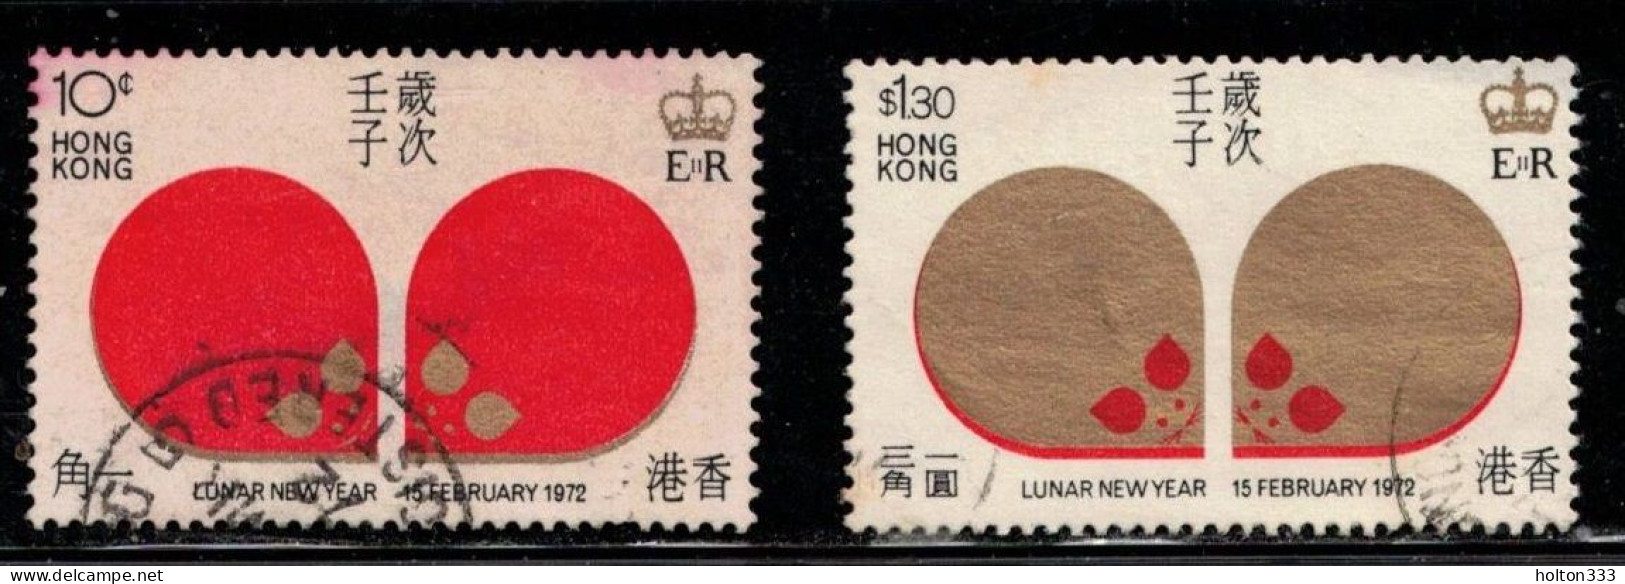 HONG KONG Scott # 268-9 Used - Lunar New Year 1972 - Used Stamps